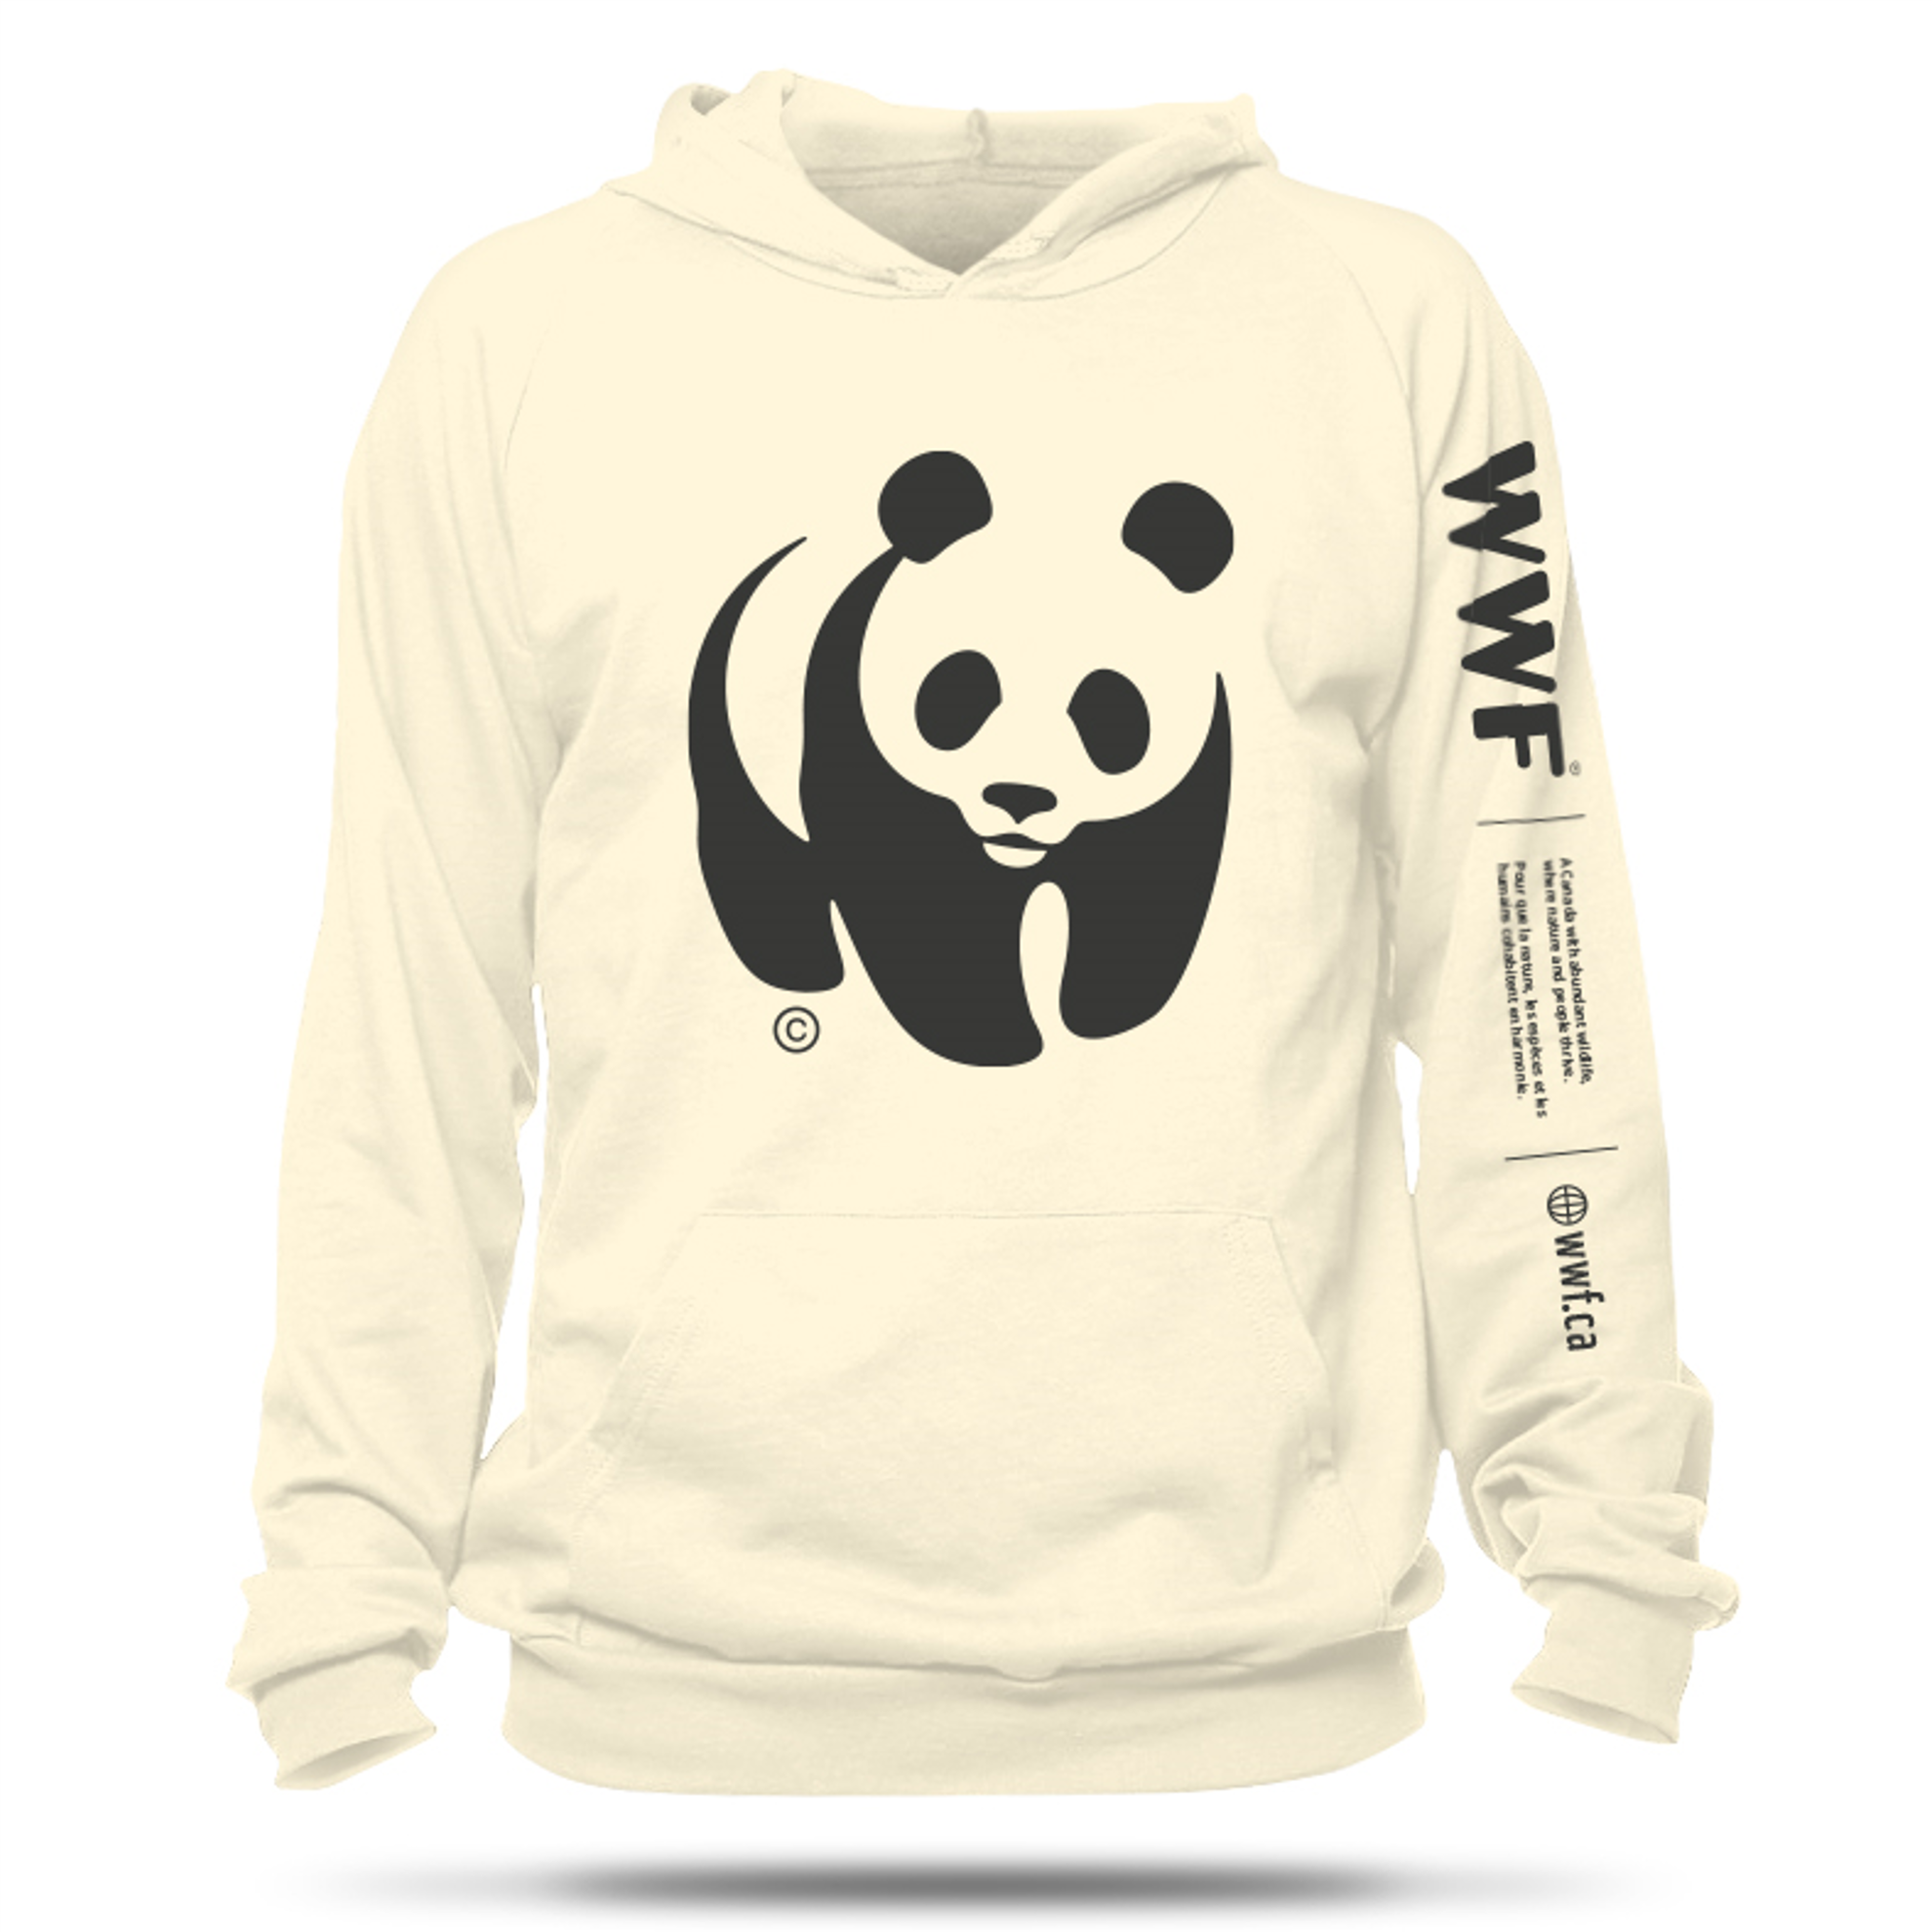 Unisex Cream Colour Hooded Sweatshirt with WWF Panda Logo on the Chest and WWF mission statement on the left sleeve